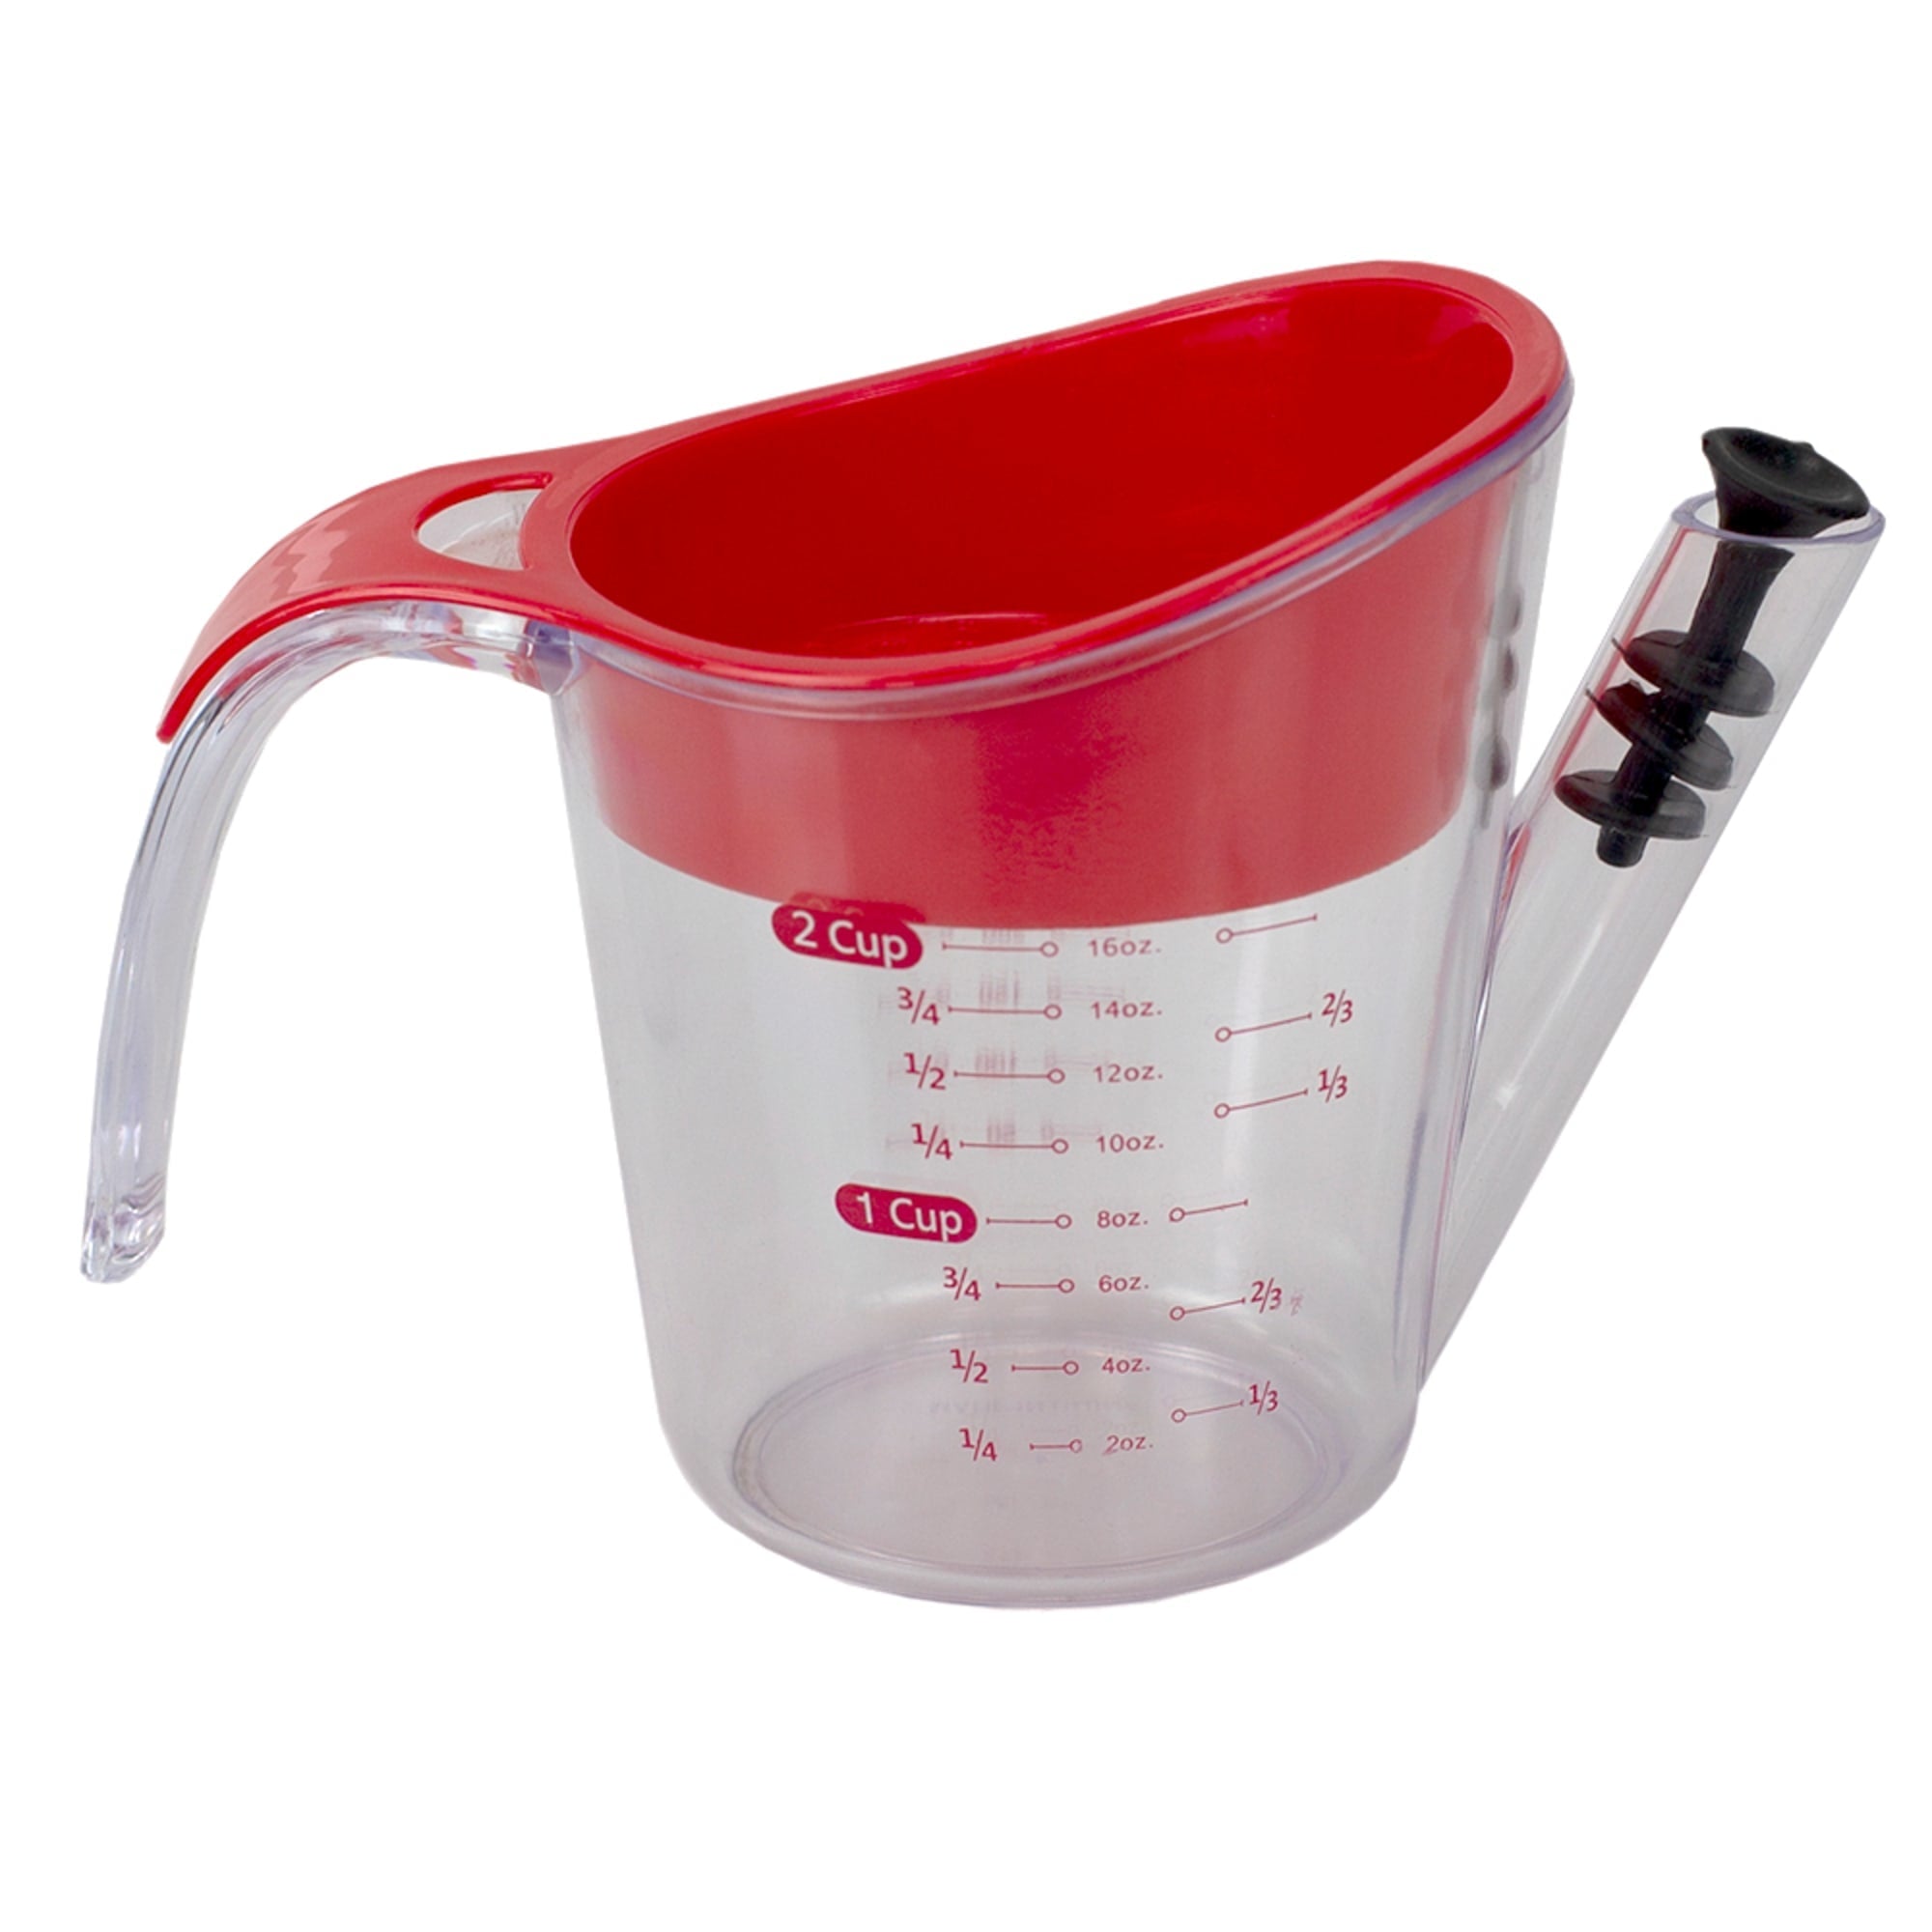 Home Basics 2 Cup Plastic Fat Separator Easy Grip Handle, Red $4.00 EACH, CASE PACK OF 12